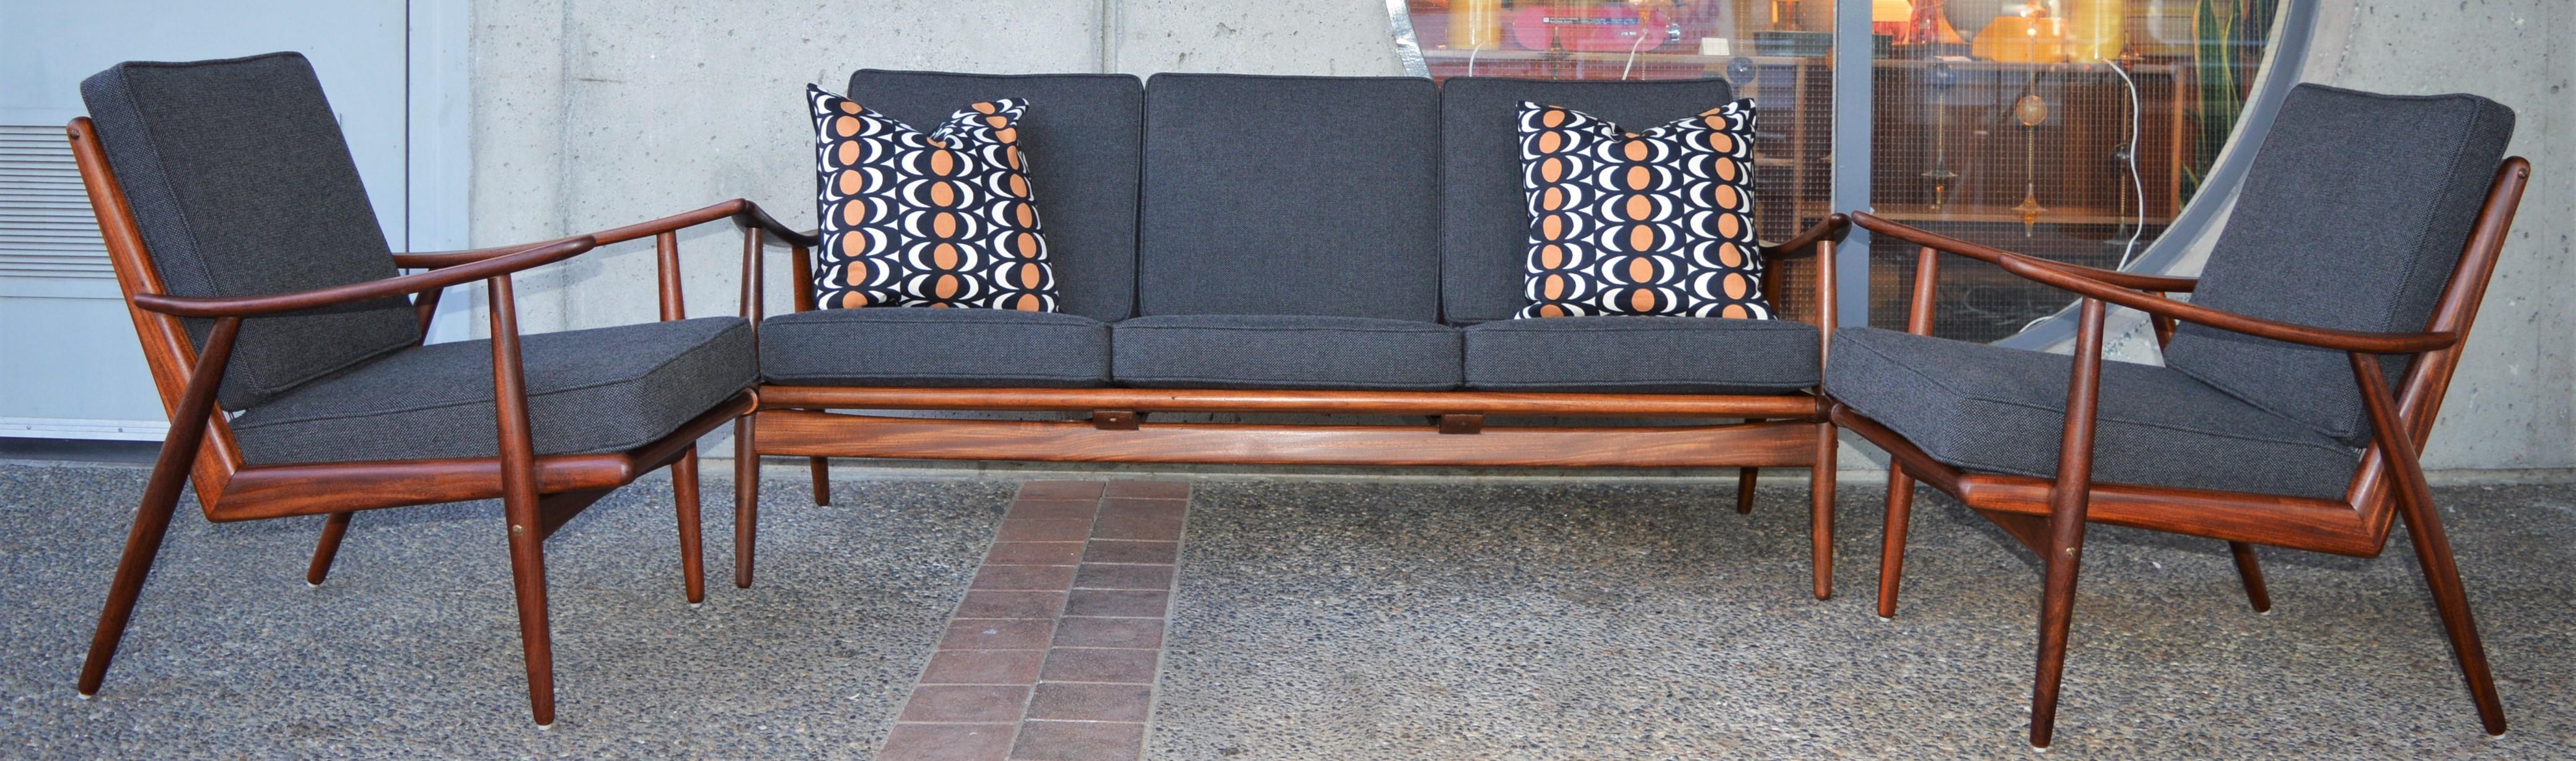 This killer restored Danish modern sofa and lounge chairs are spectacular - and so hard to have a complete set! Made entirely of solid Afromesian Teak, note the dramatic boomerang shape framing the sides of each seat, much in the style of Peter